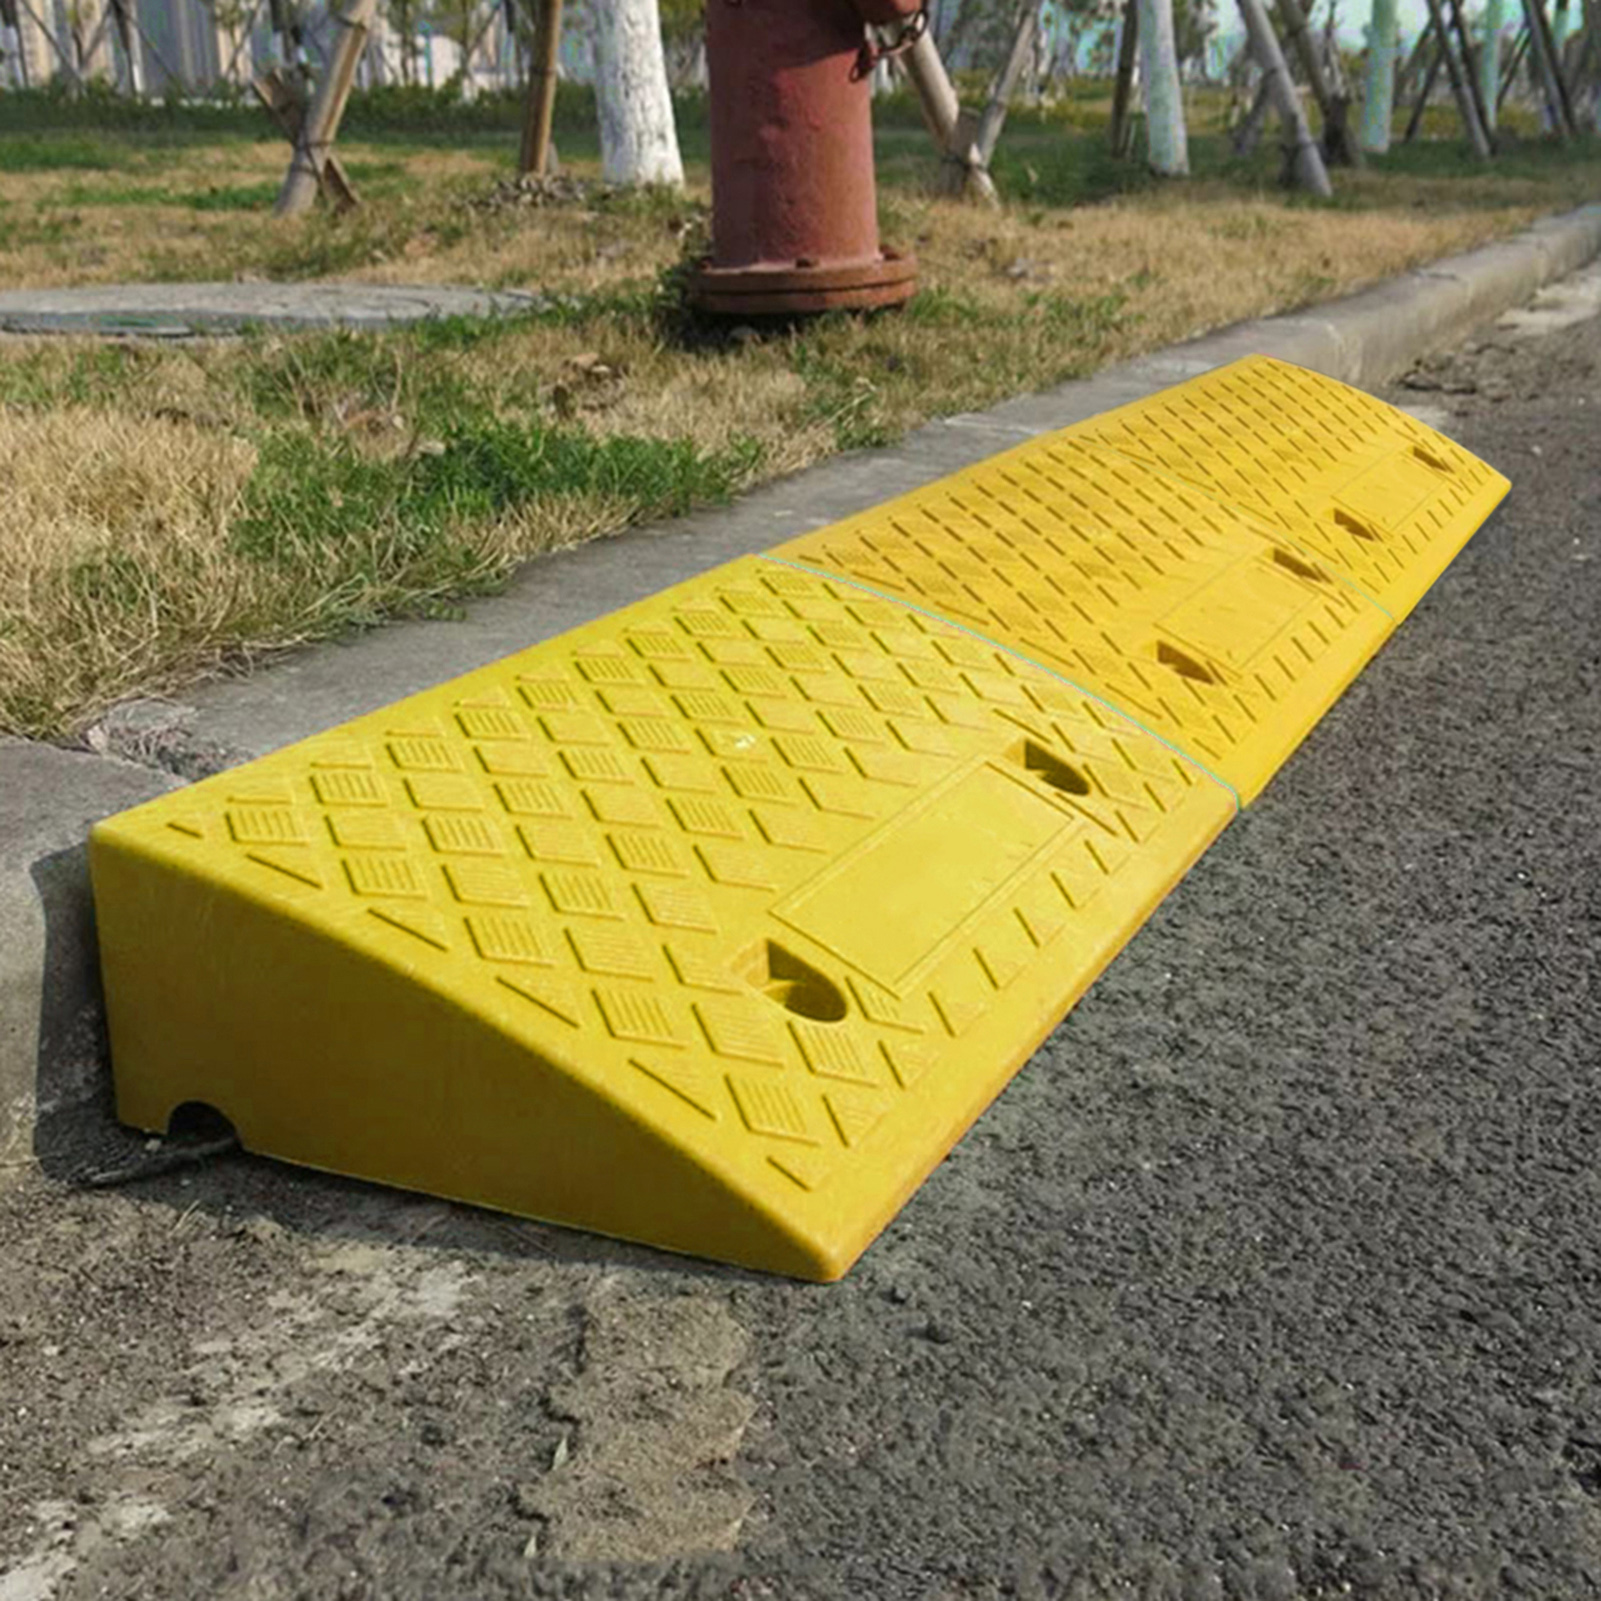 Cars Motorcycle Light Portable Curb Ramp Hard Plastic Threshold Ramps Durable Step Pad Parking Lots Ramp Mat For Cars Wheelchair